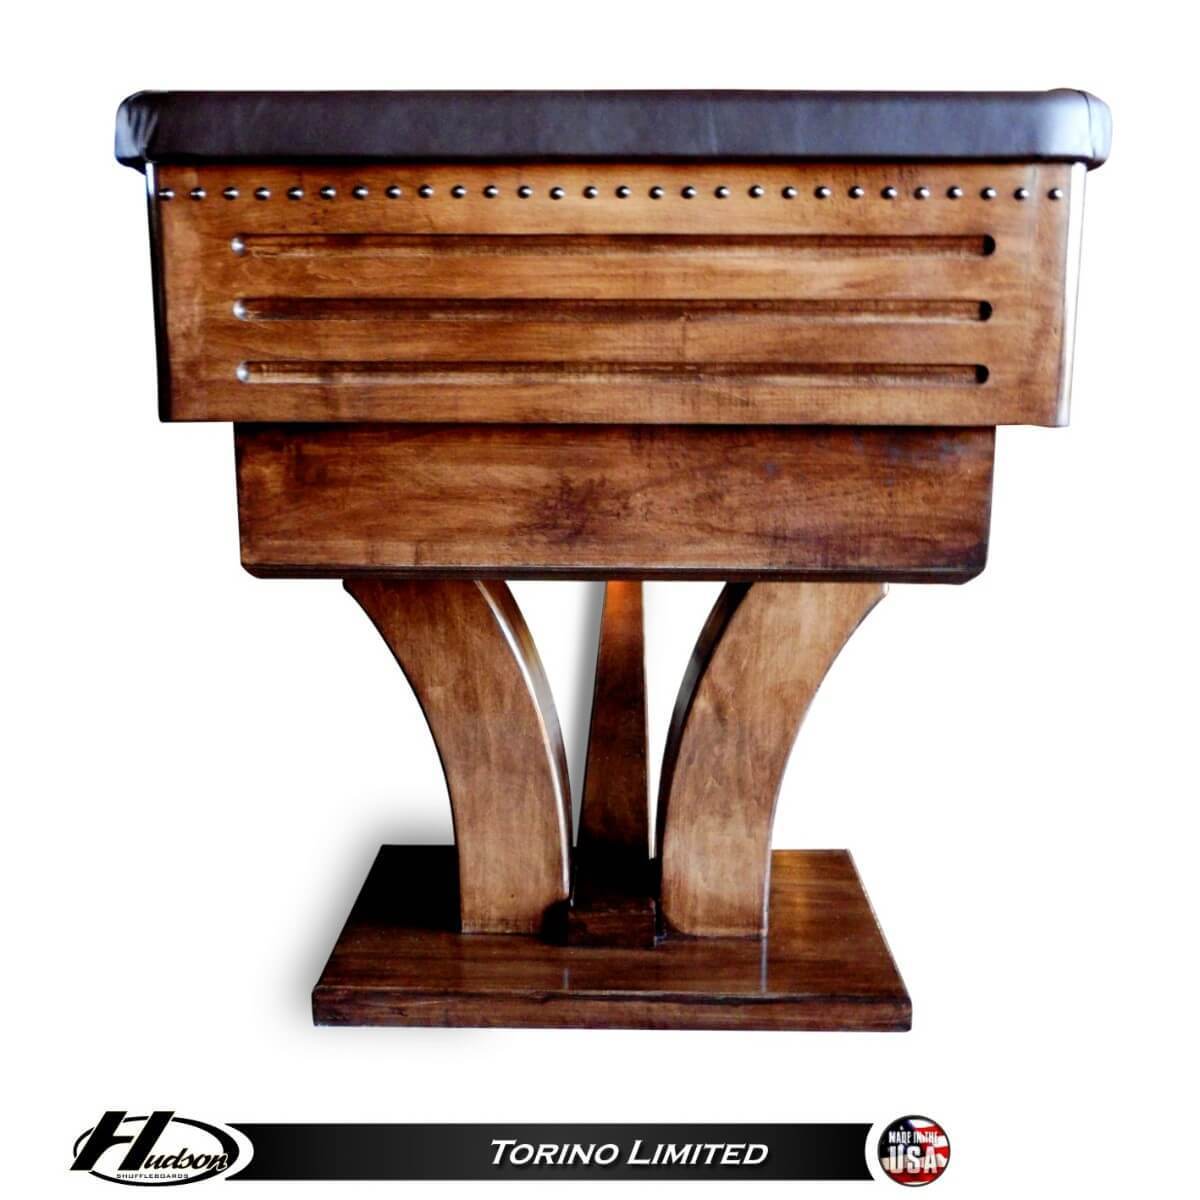 Hudson Torino Limited Edition Shuffleboard Table 9'-22' with Custom Stain Options - Gaming Blaze